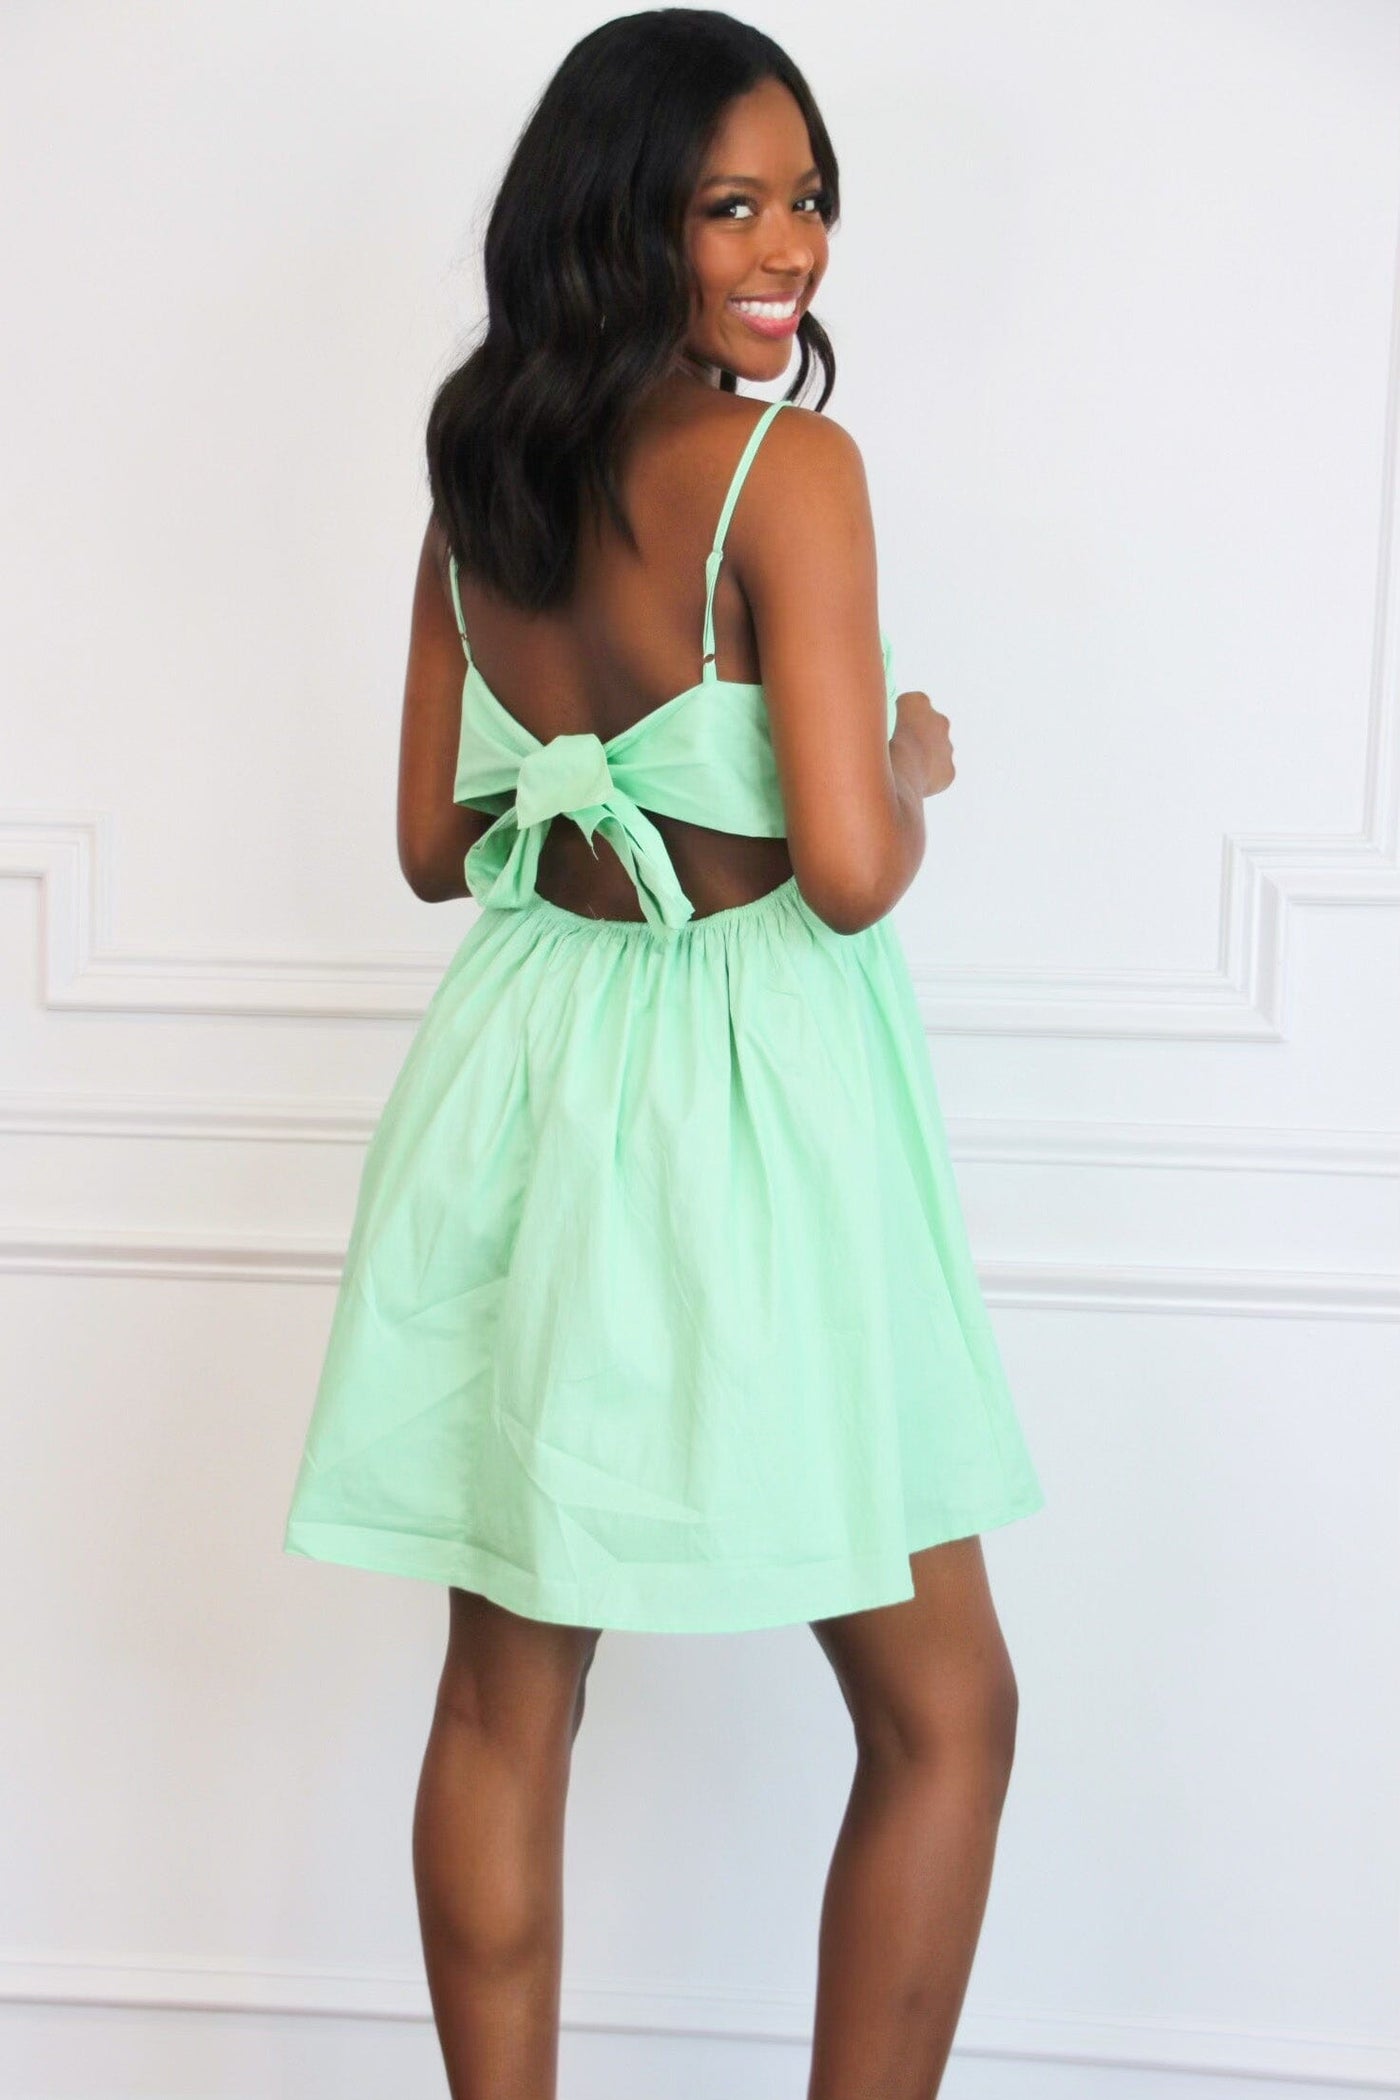 Tilly Babydoll Bow Back Dress: Mint Green - Bella and Bloom Boutique